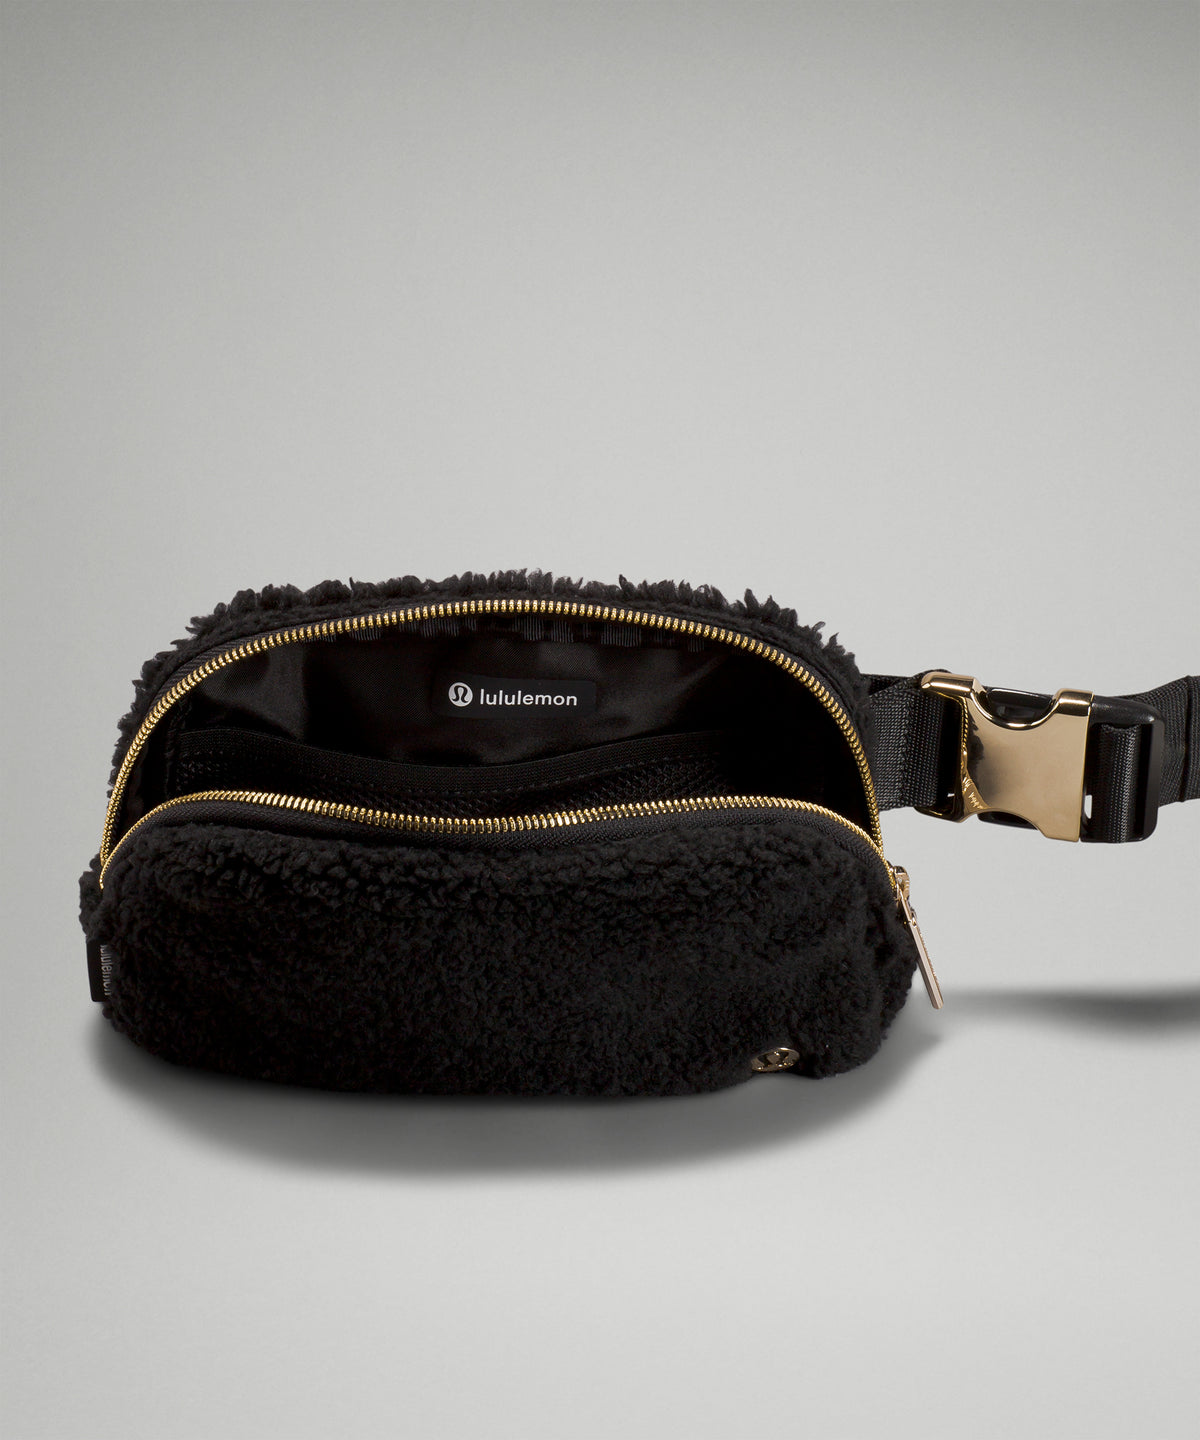 Lululemon's Cult-Fave Fleece Belt Bag Is Back In Stock Just in Time for Fall